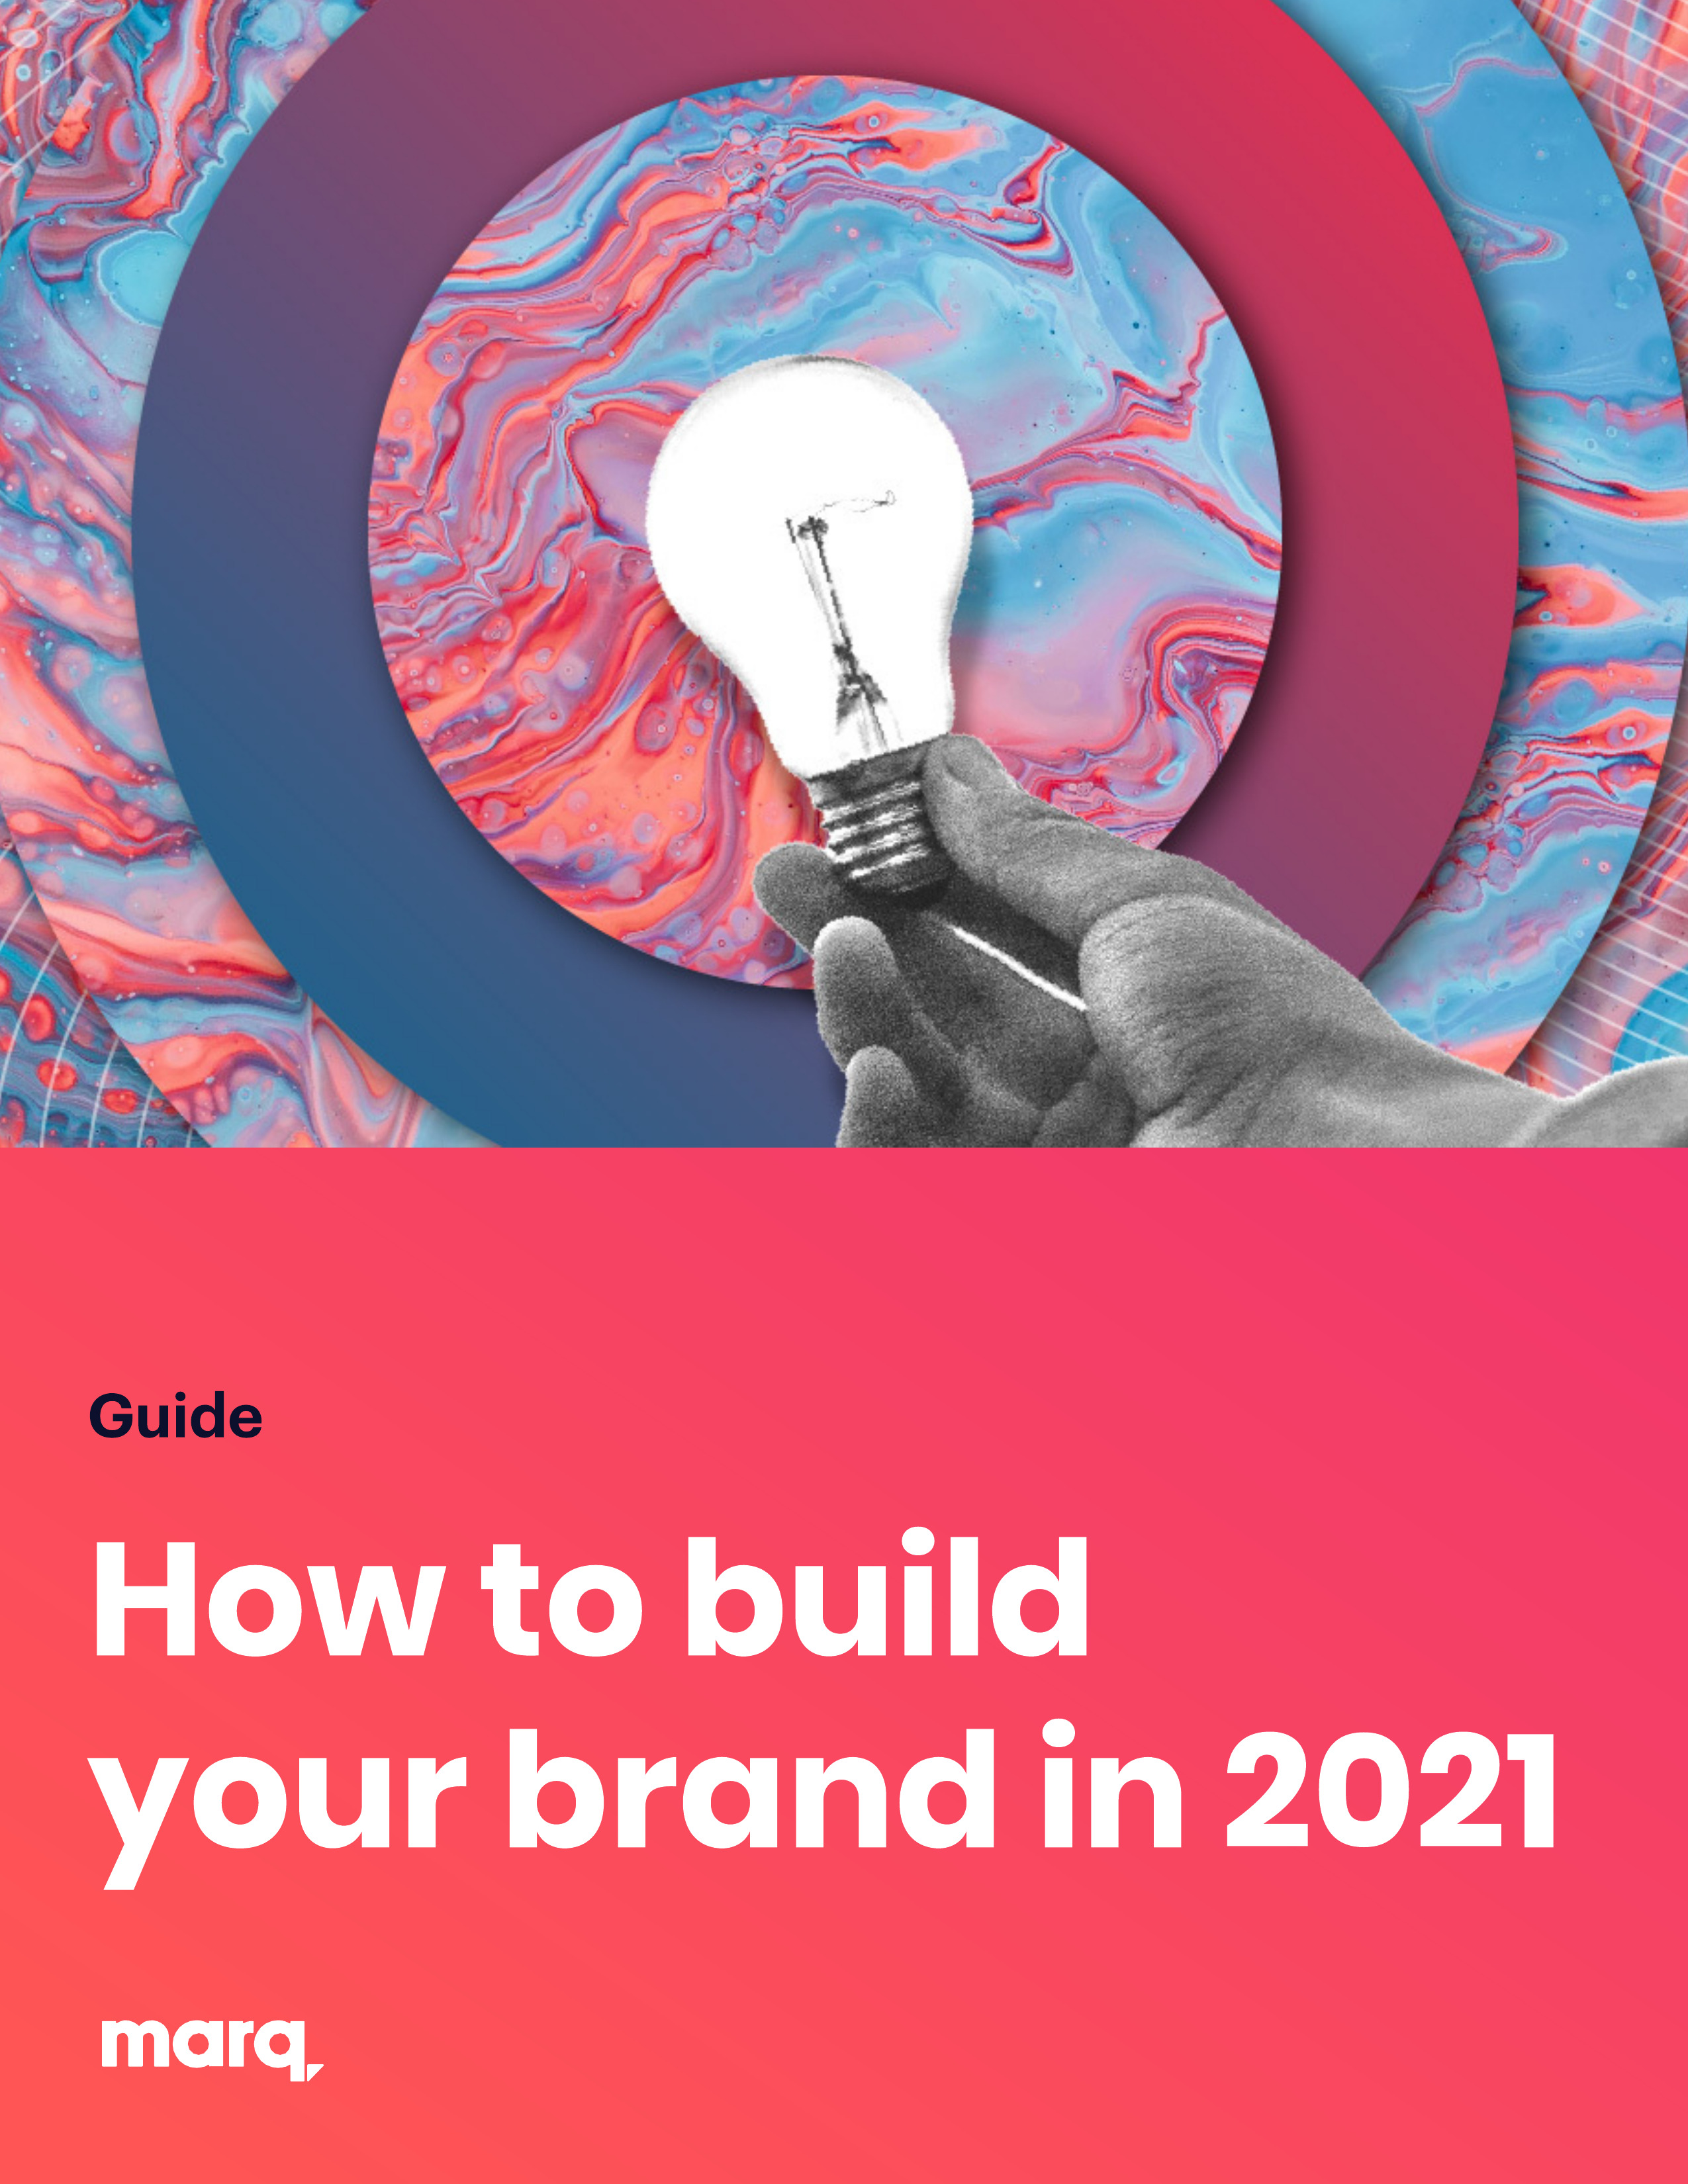 ebook-how-to-build-your-brand